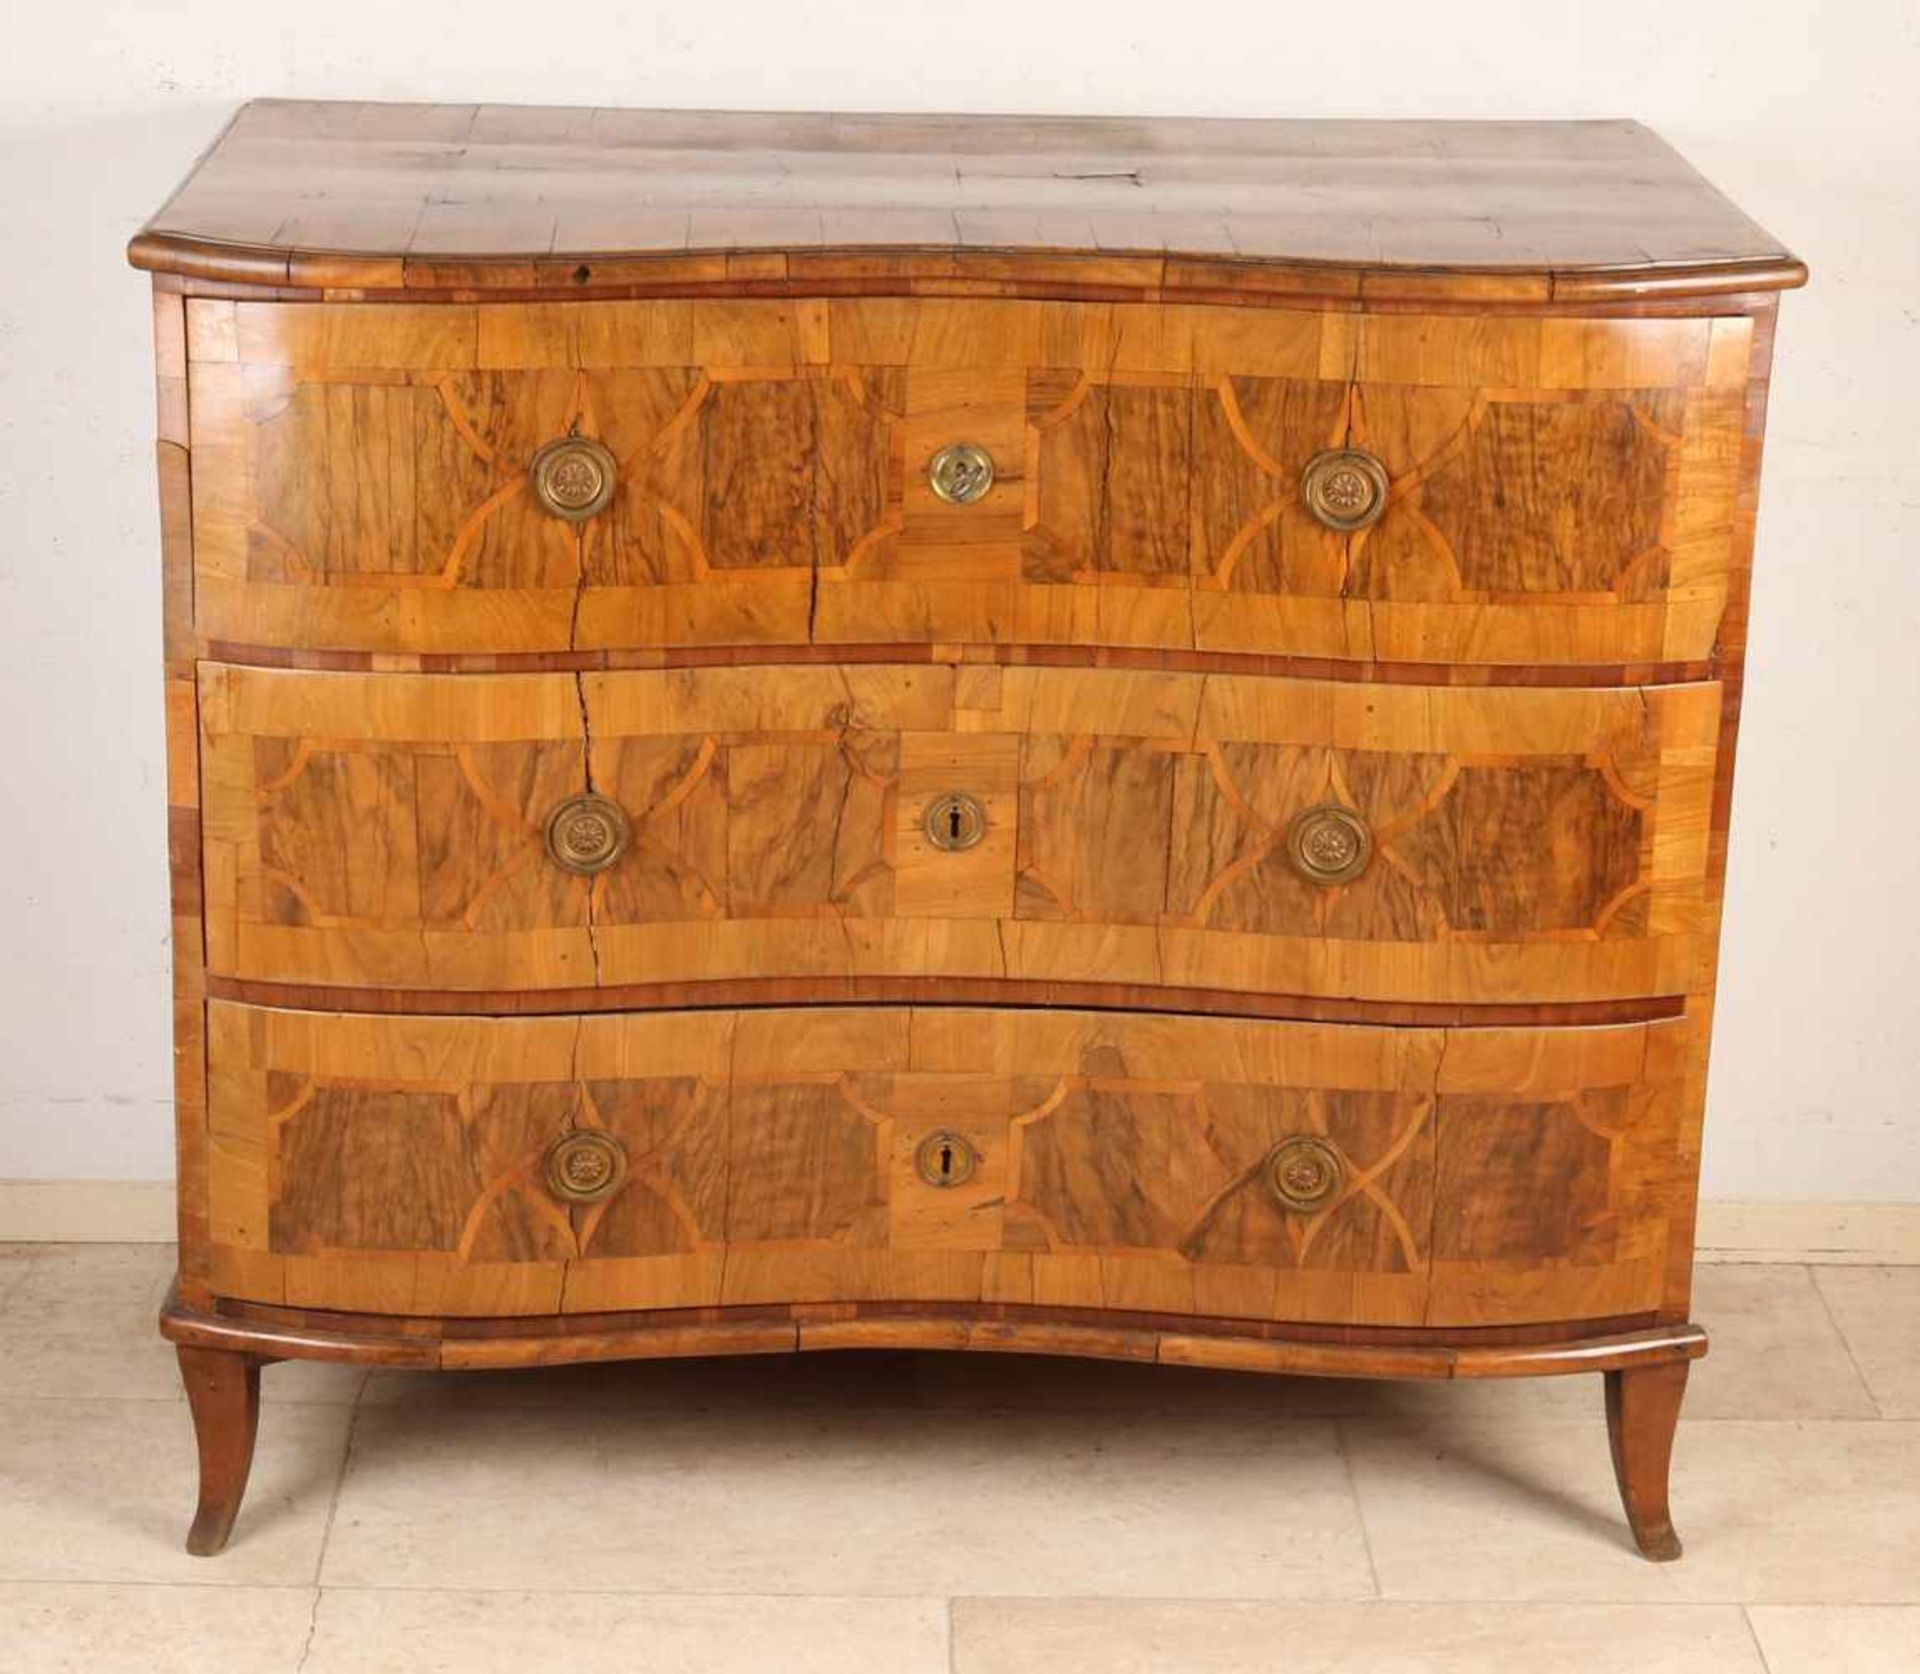 18th Century German Baroque walnut curved drawers with original locks. Replace batter.